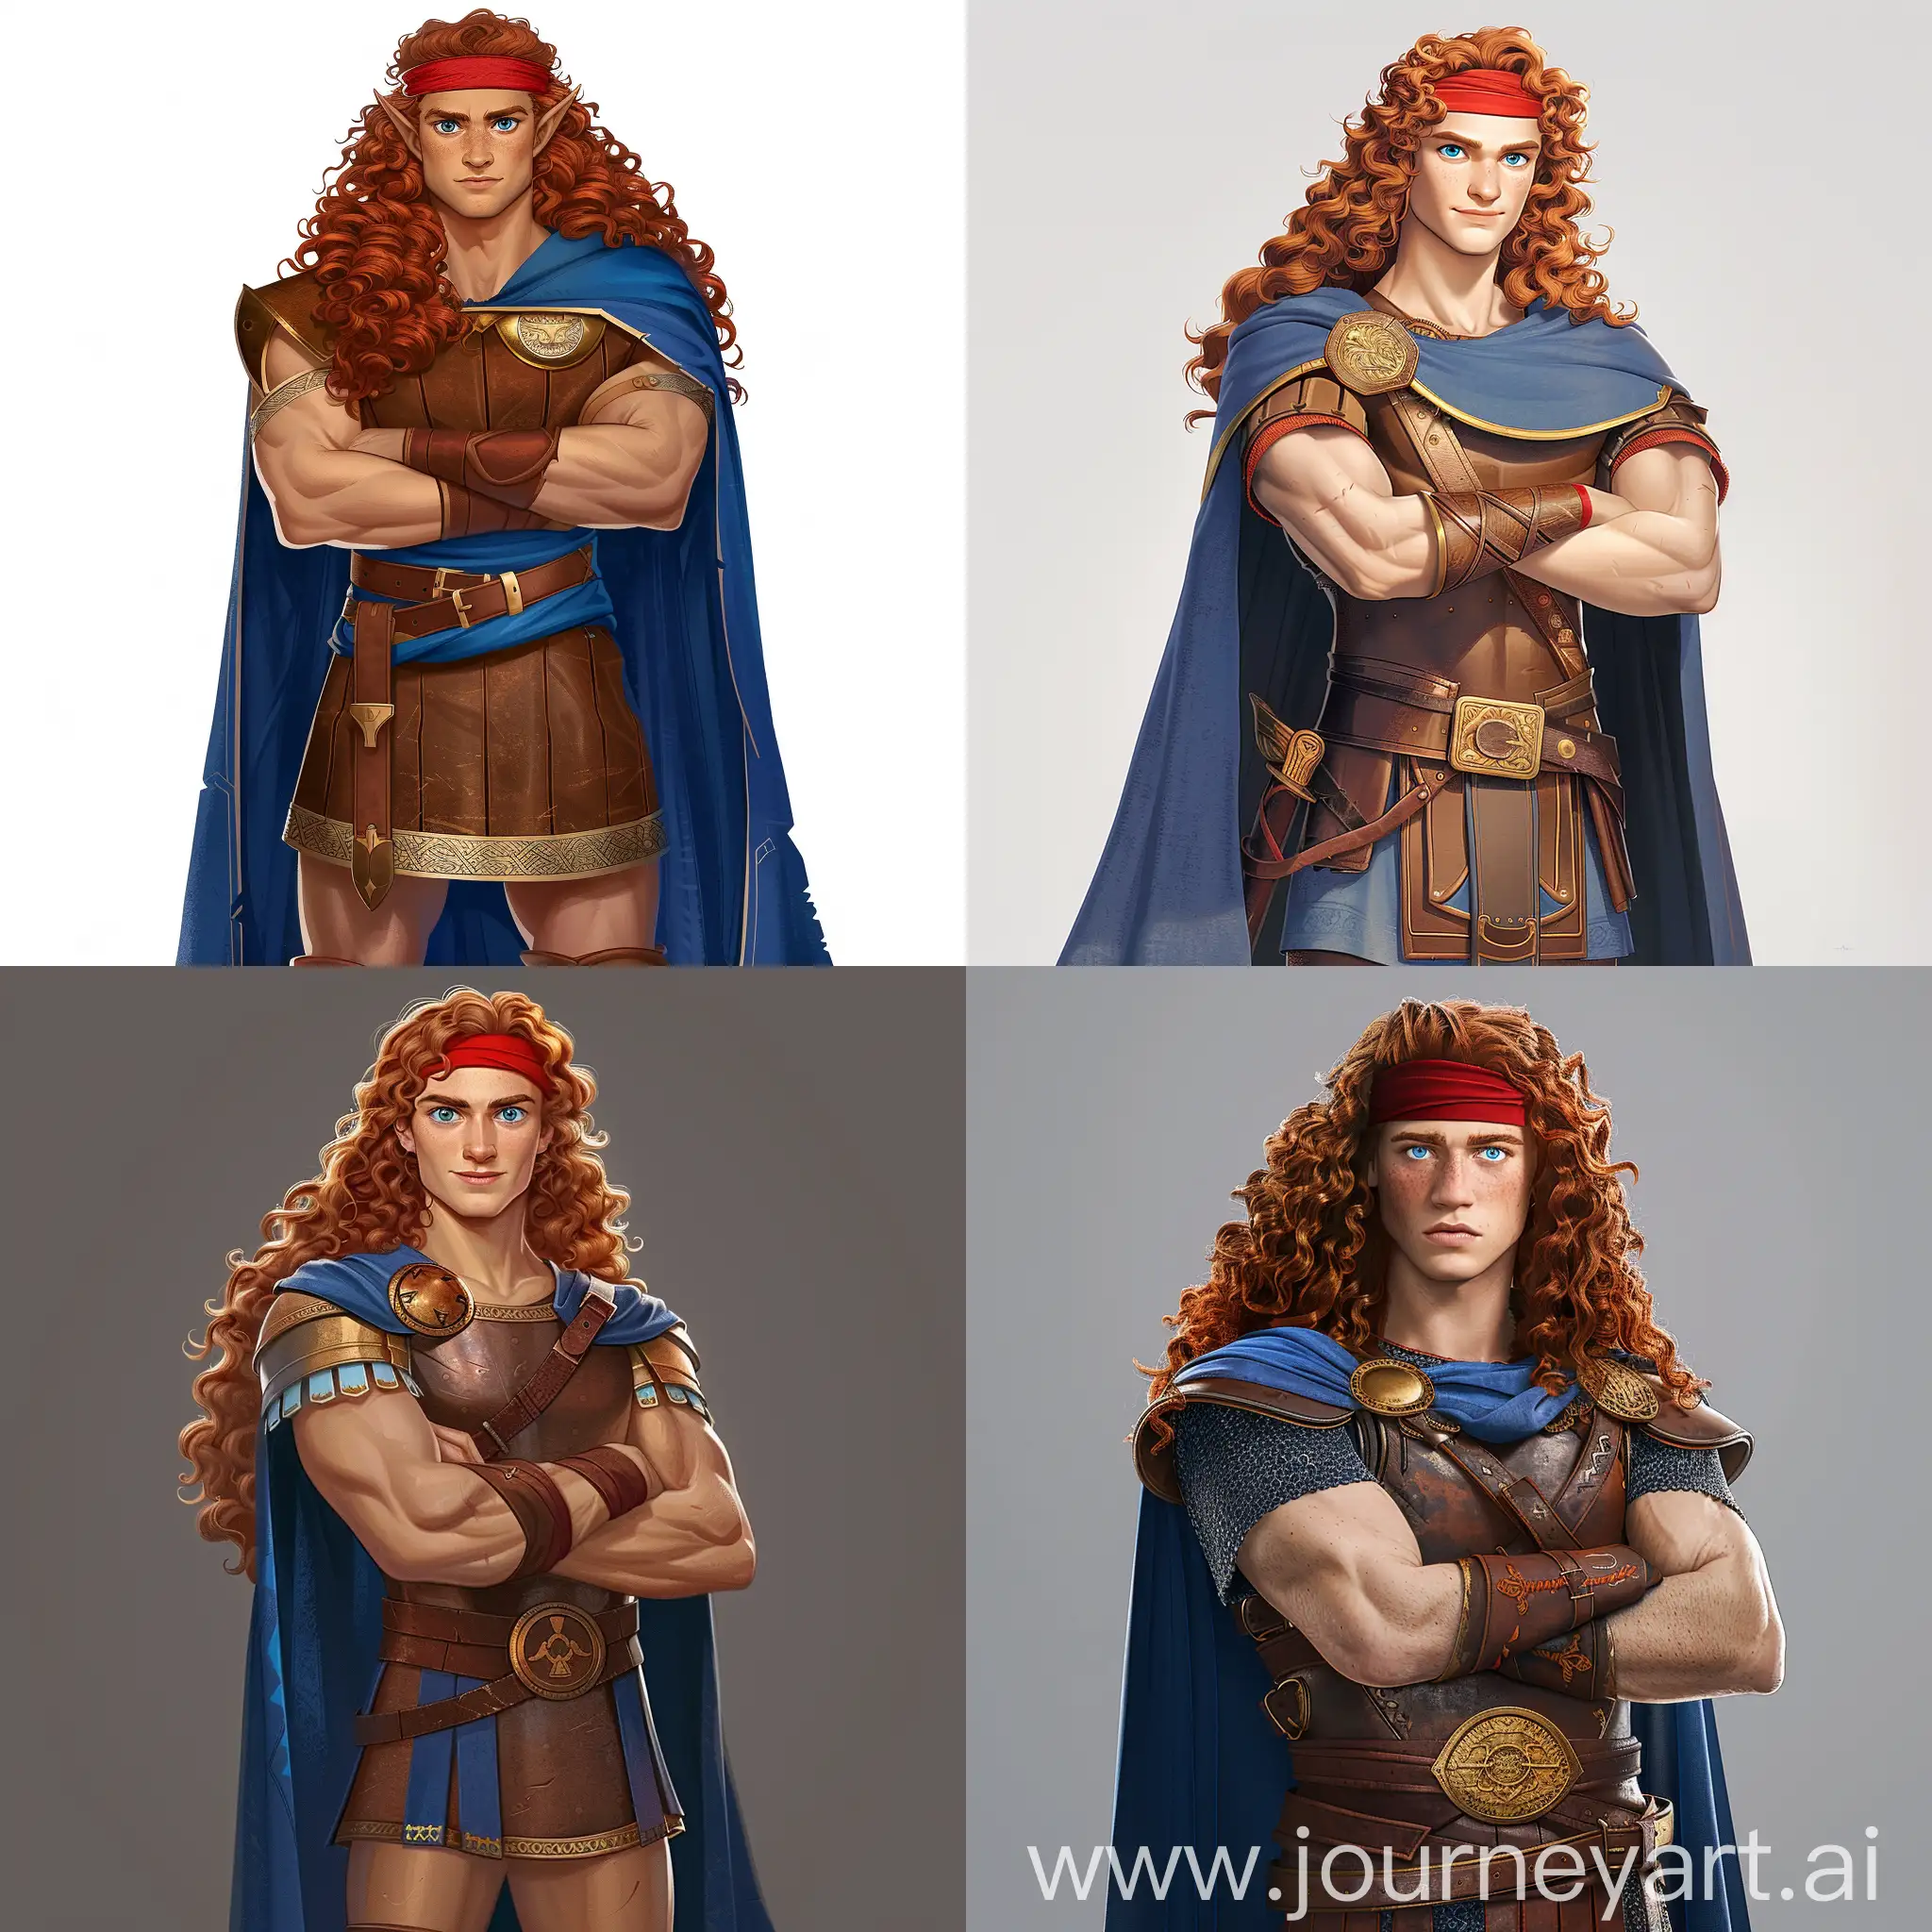 Scene from Gravity Falls cartoon"Male character, tall and muscular build, broad shoulders, long curly red hair, blue eyes with a kind and confident expression, strong jawline, square face, fair skin, wearing a red headband, dressed in a brown leather tunic and a blue cape, brown belt with a gold emblem, leather wristbands, knee-high brown leather sandals with straps, heroic and proud posture, arms crossed over his chest, handsome and imposing appearance."